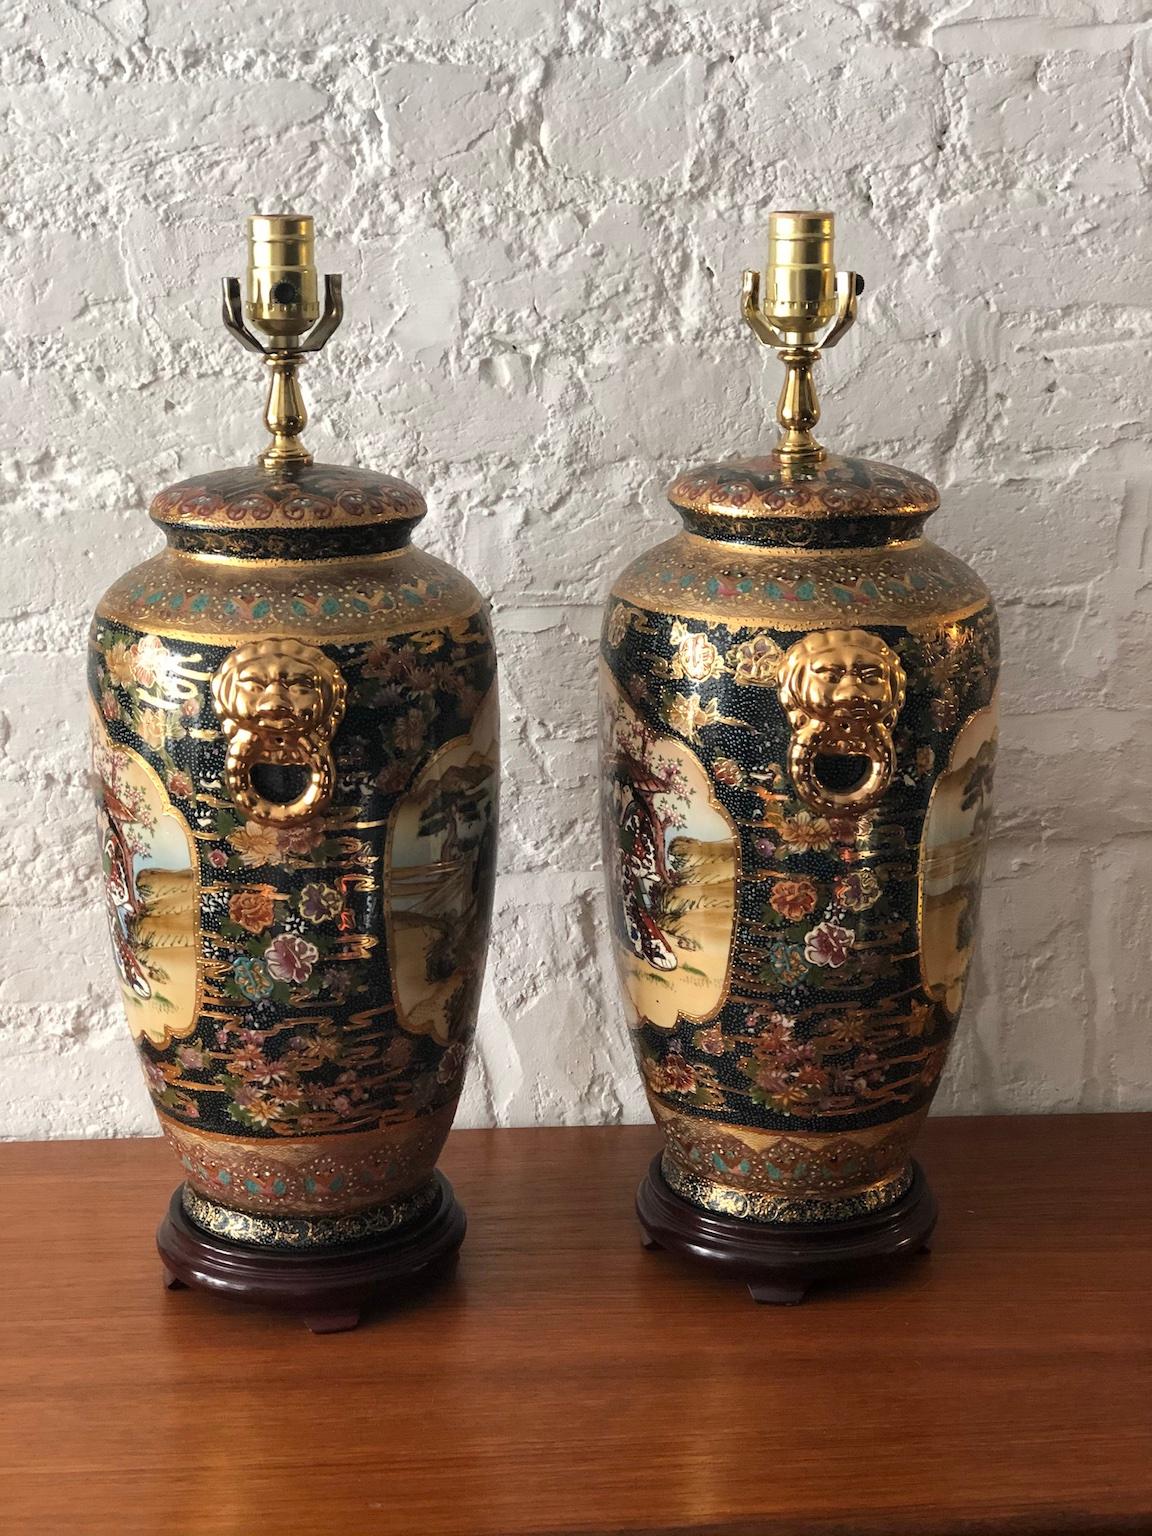 Pair of Japanese Satsuma Moriage double sided hand painted vase lamps

Stunning pair of Japanese Satsuma Moriage hand painted vases, mounted on wooden bases and converted to lamps.
Lion head handles either side. 

Decorated with heavy raised